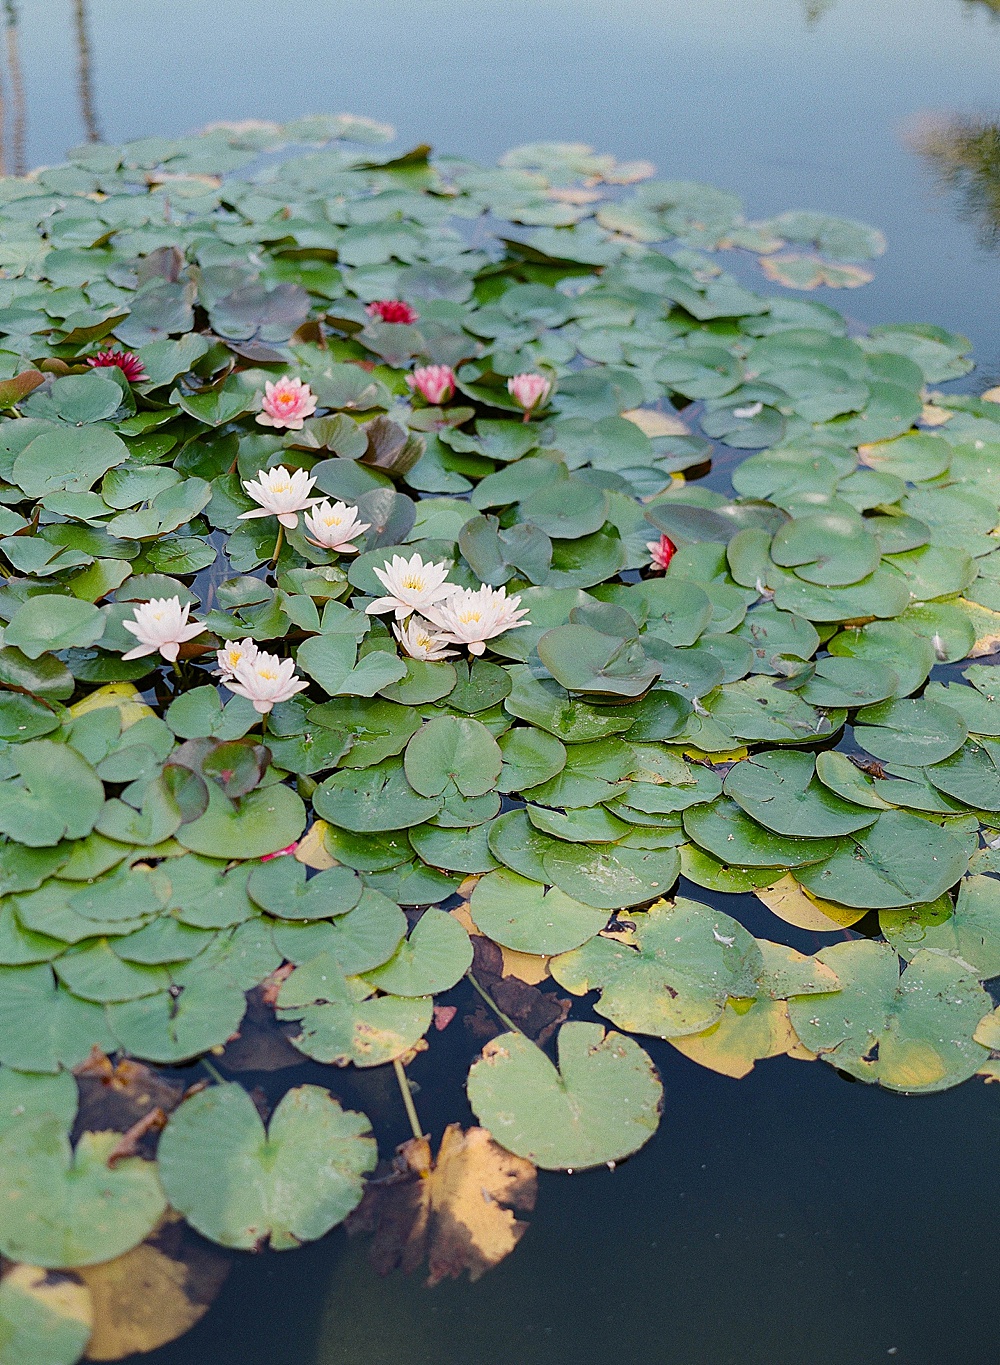 lily pads in Balboa Park